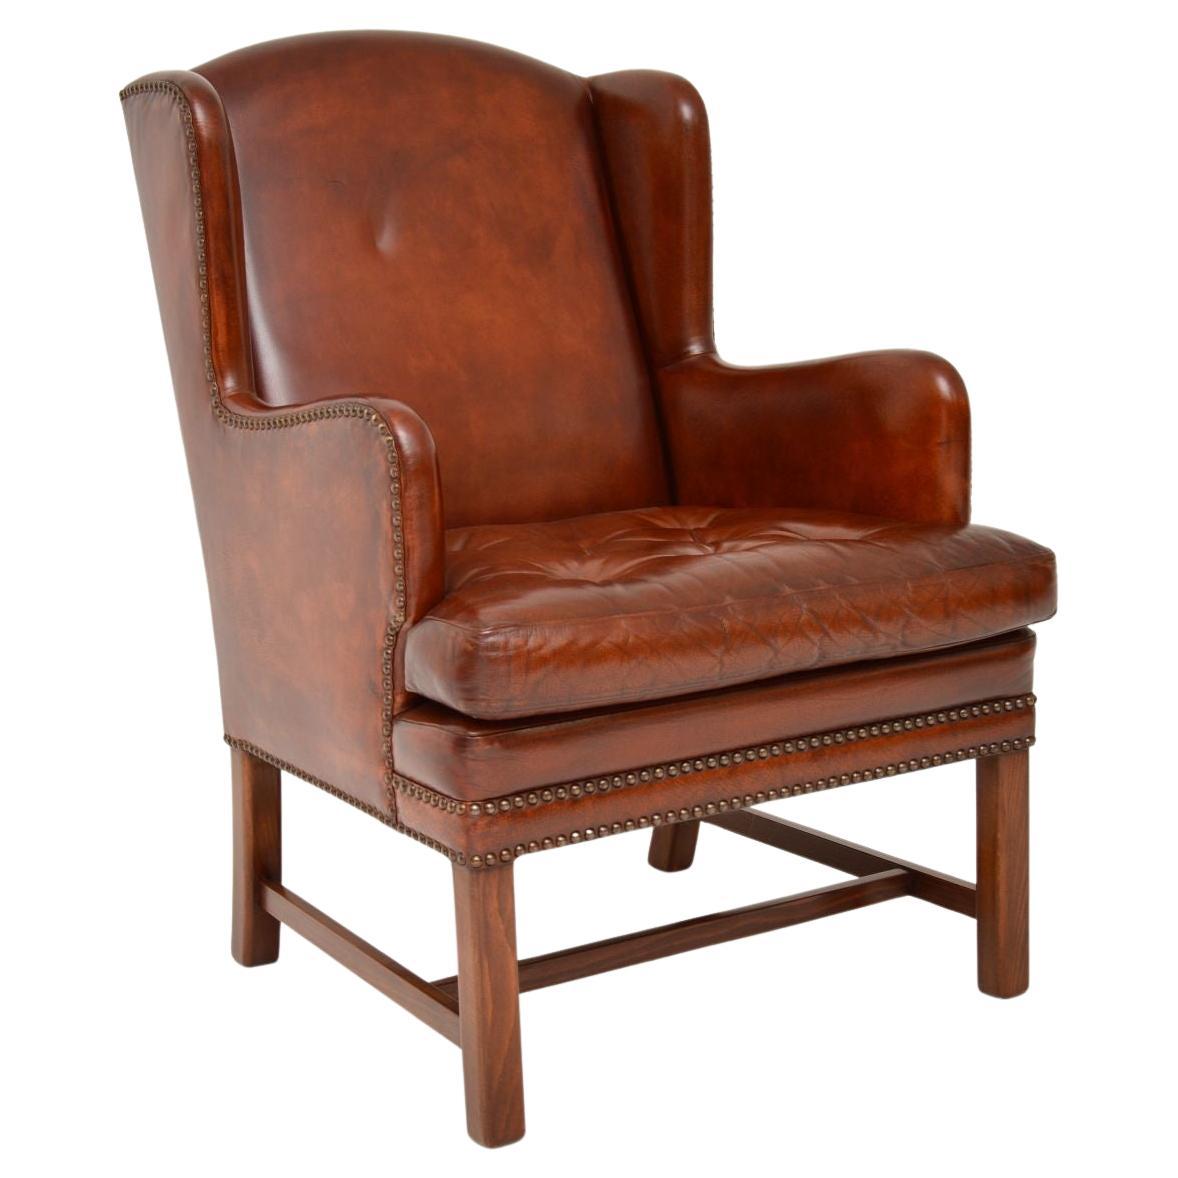 Antique Swedish Leather Wing Back Armchair